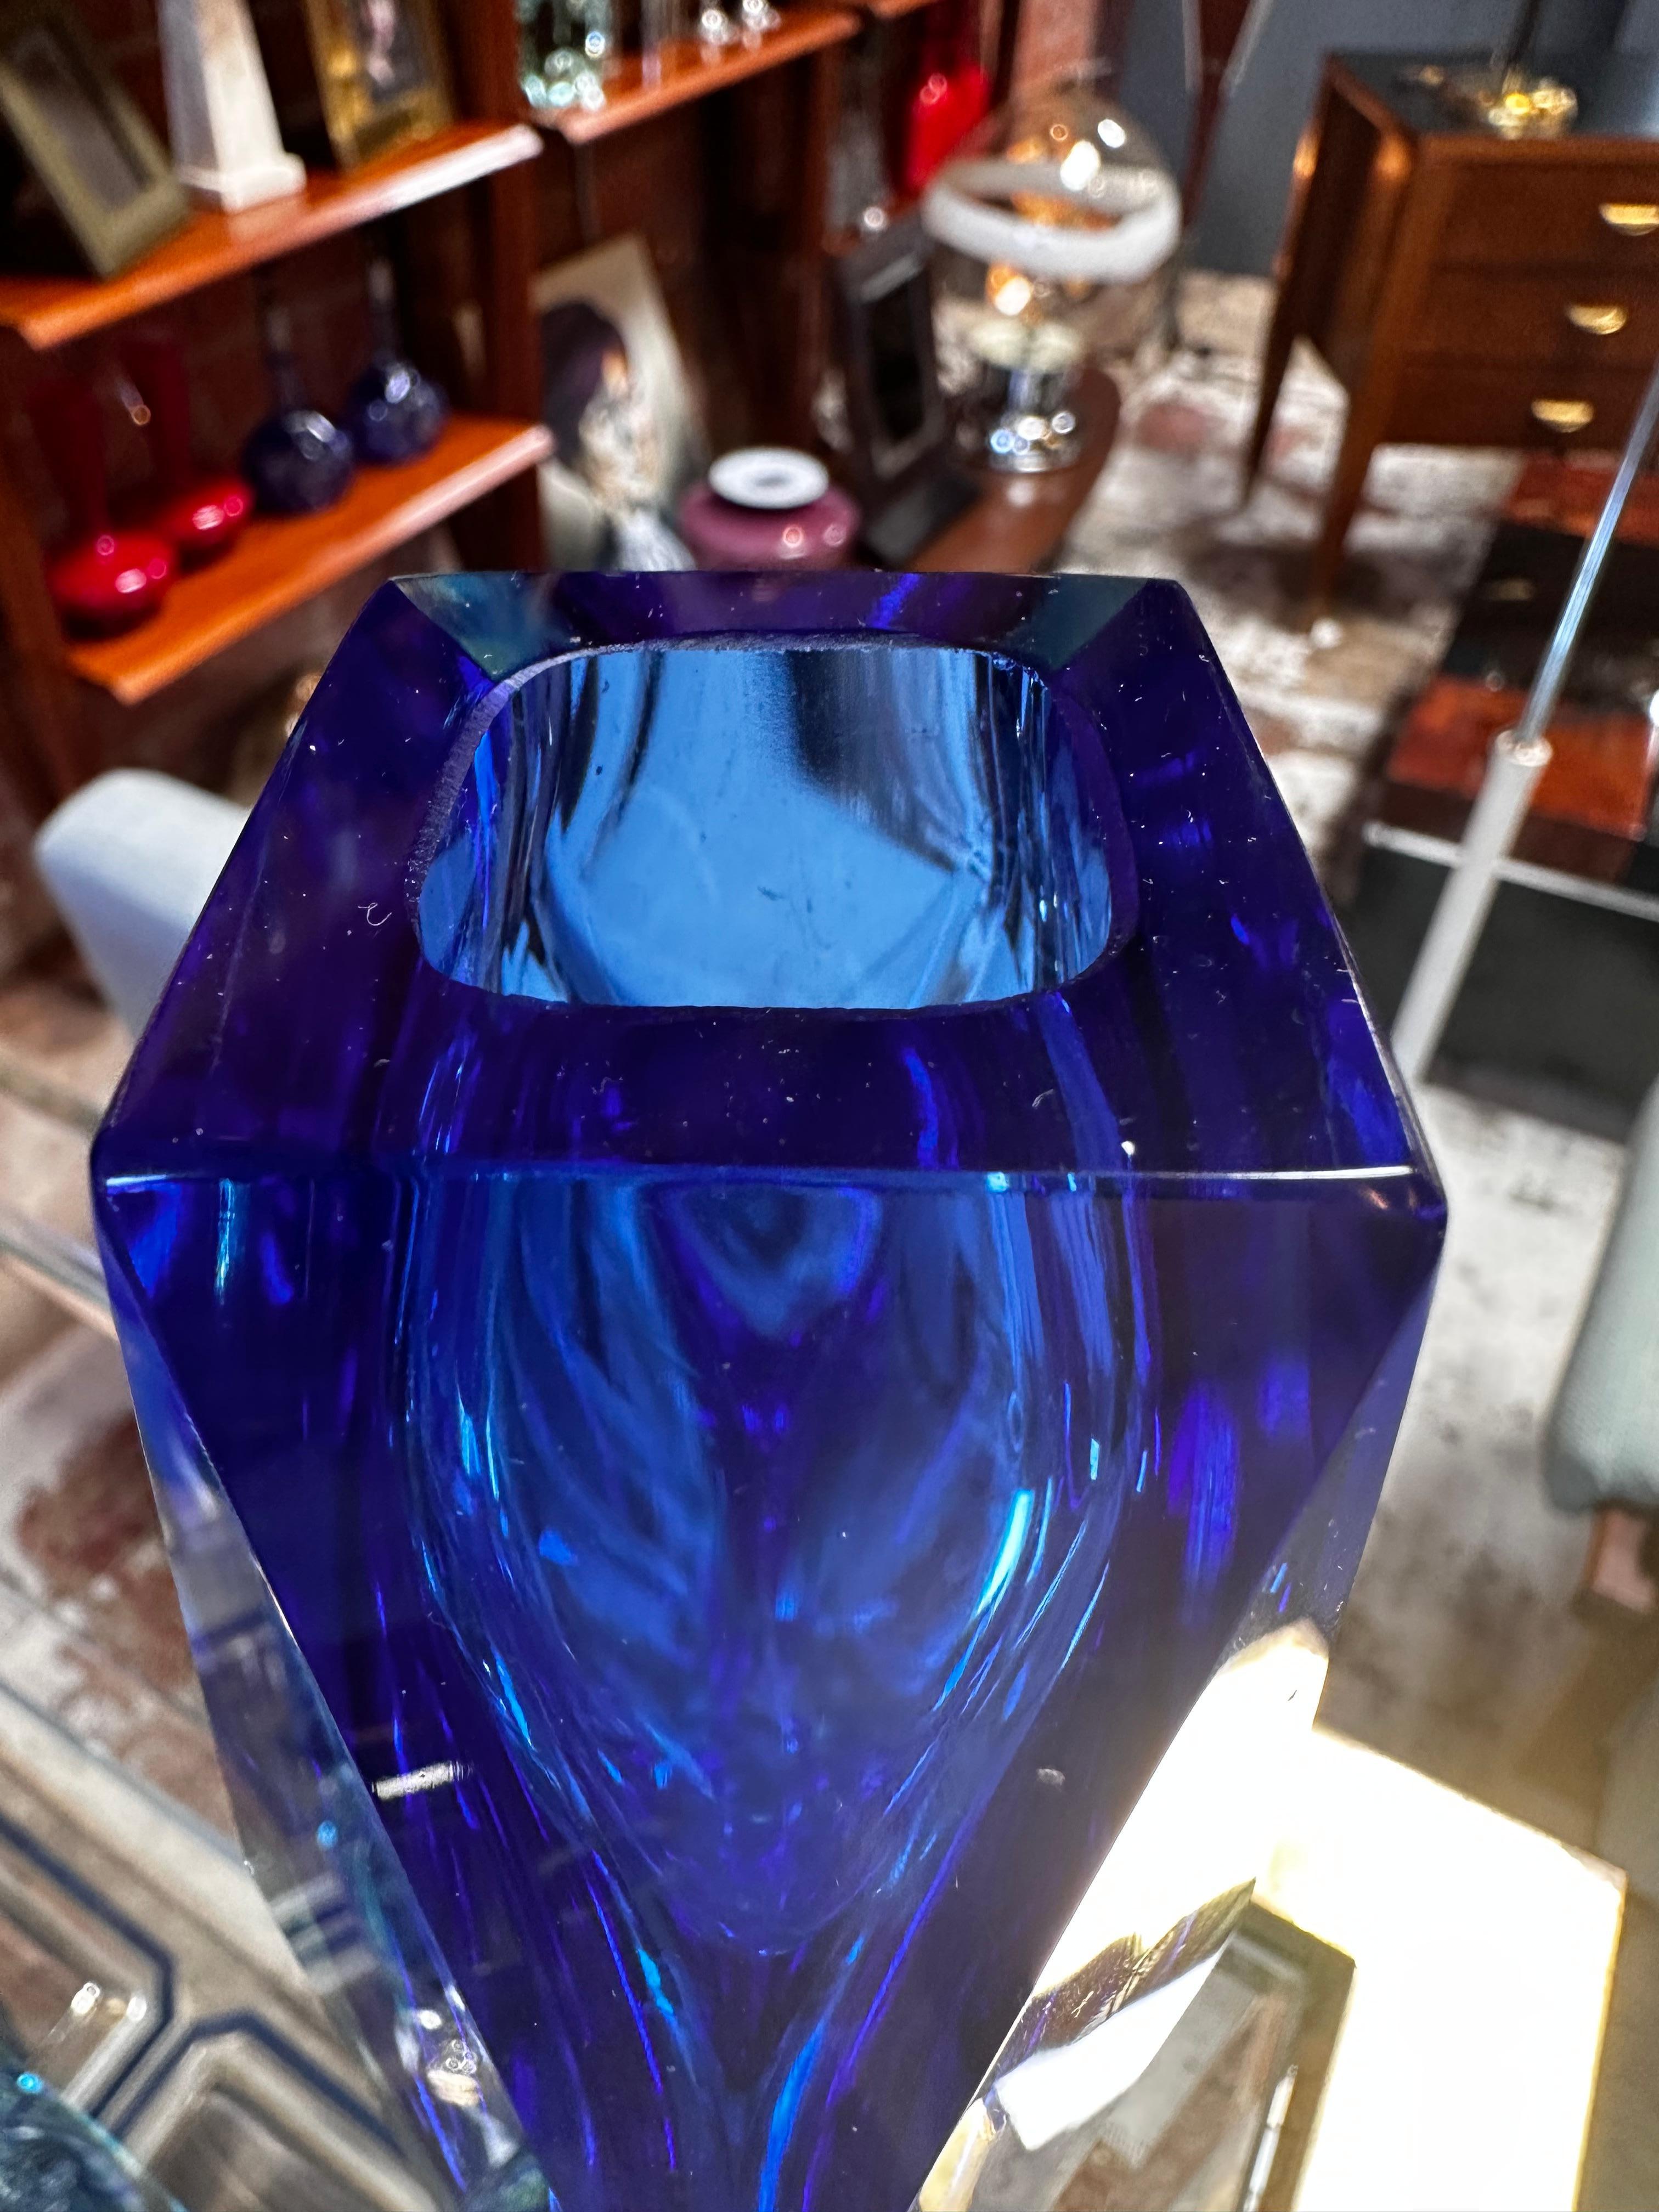 The Vintage Italian Decorative Medium Murano Vase by Mandruzzato showcases the exquisite artistry of Murano glass, beautifully realized in a soothing blue hue. Crafted by skilled artisans, this vase bears the distinctive touch of Mandruzzato's